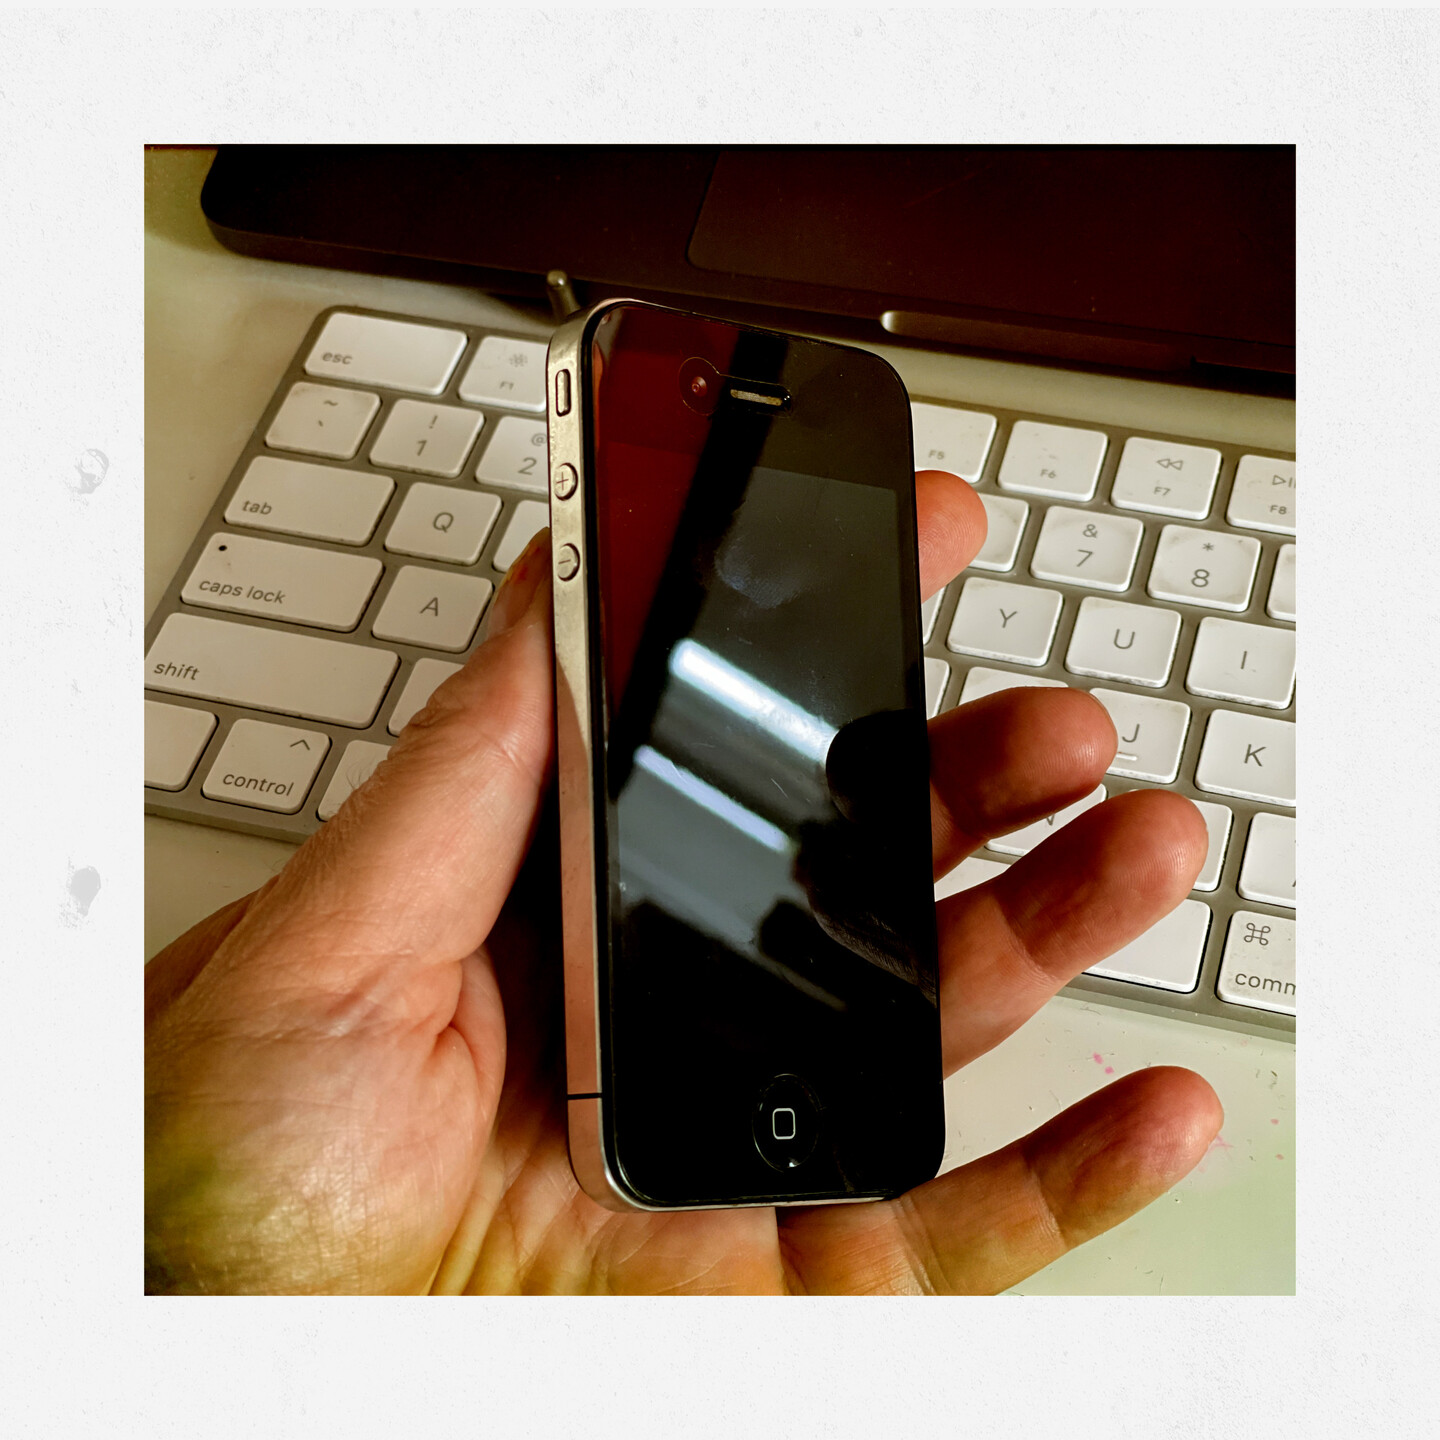 An Apple iPhone 4 held by a left hand above an Apple keyboard. 